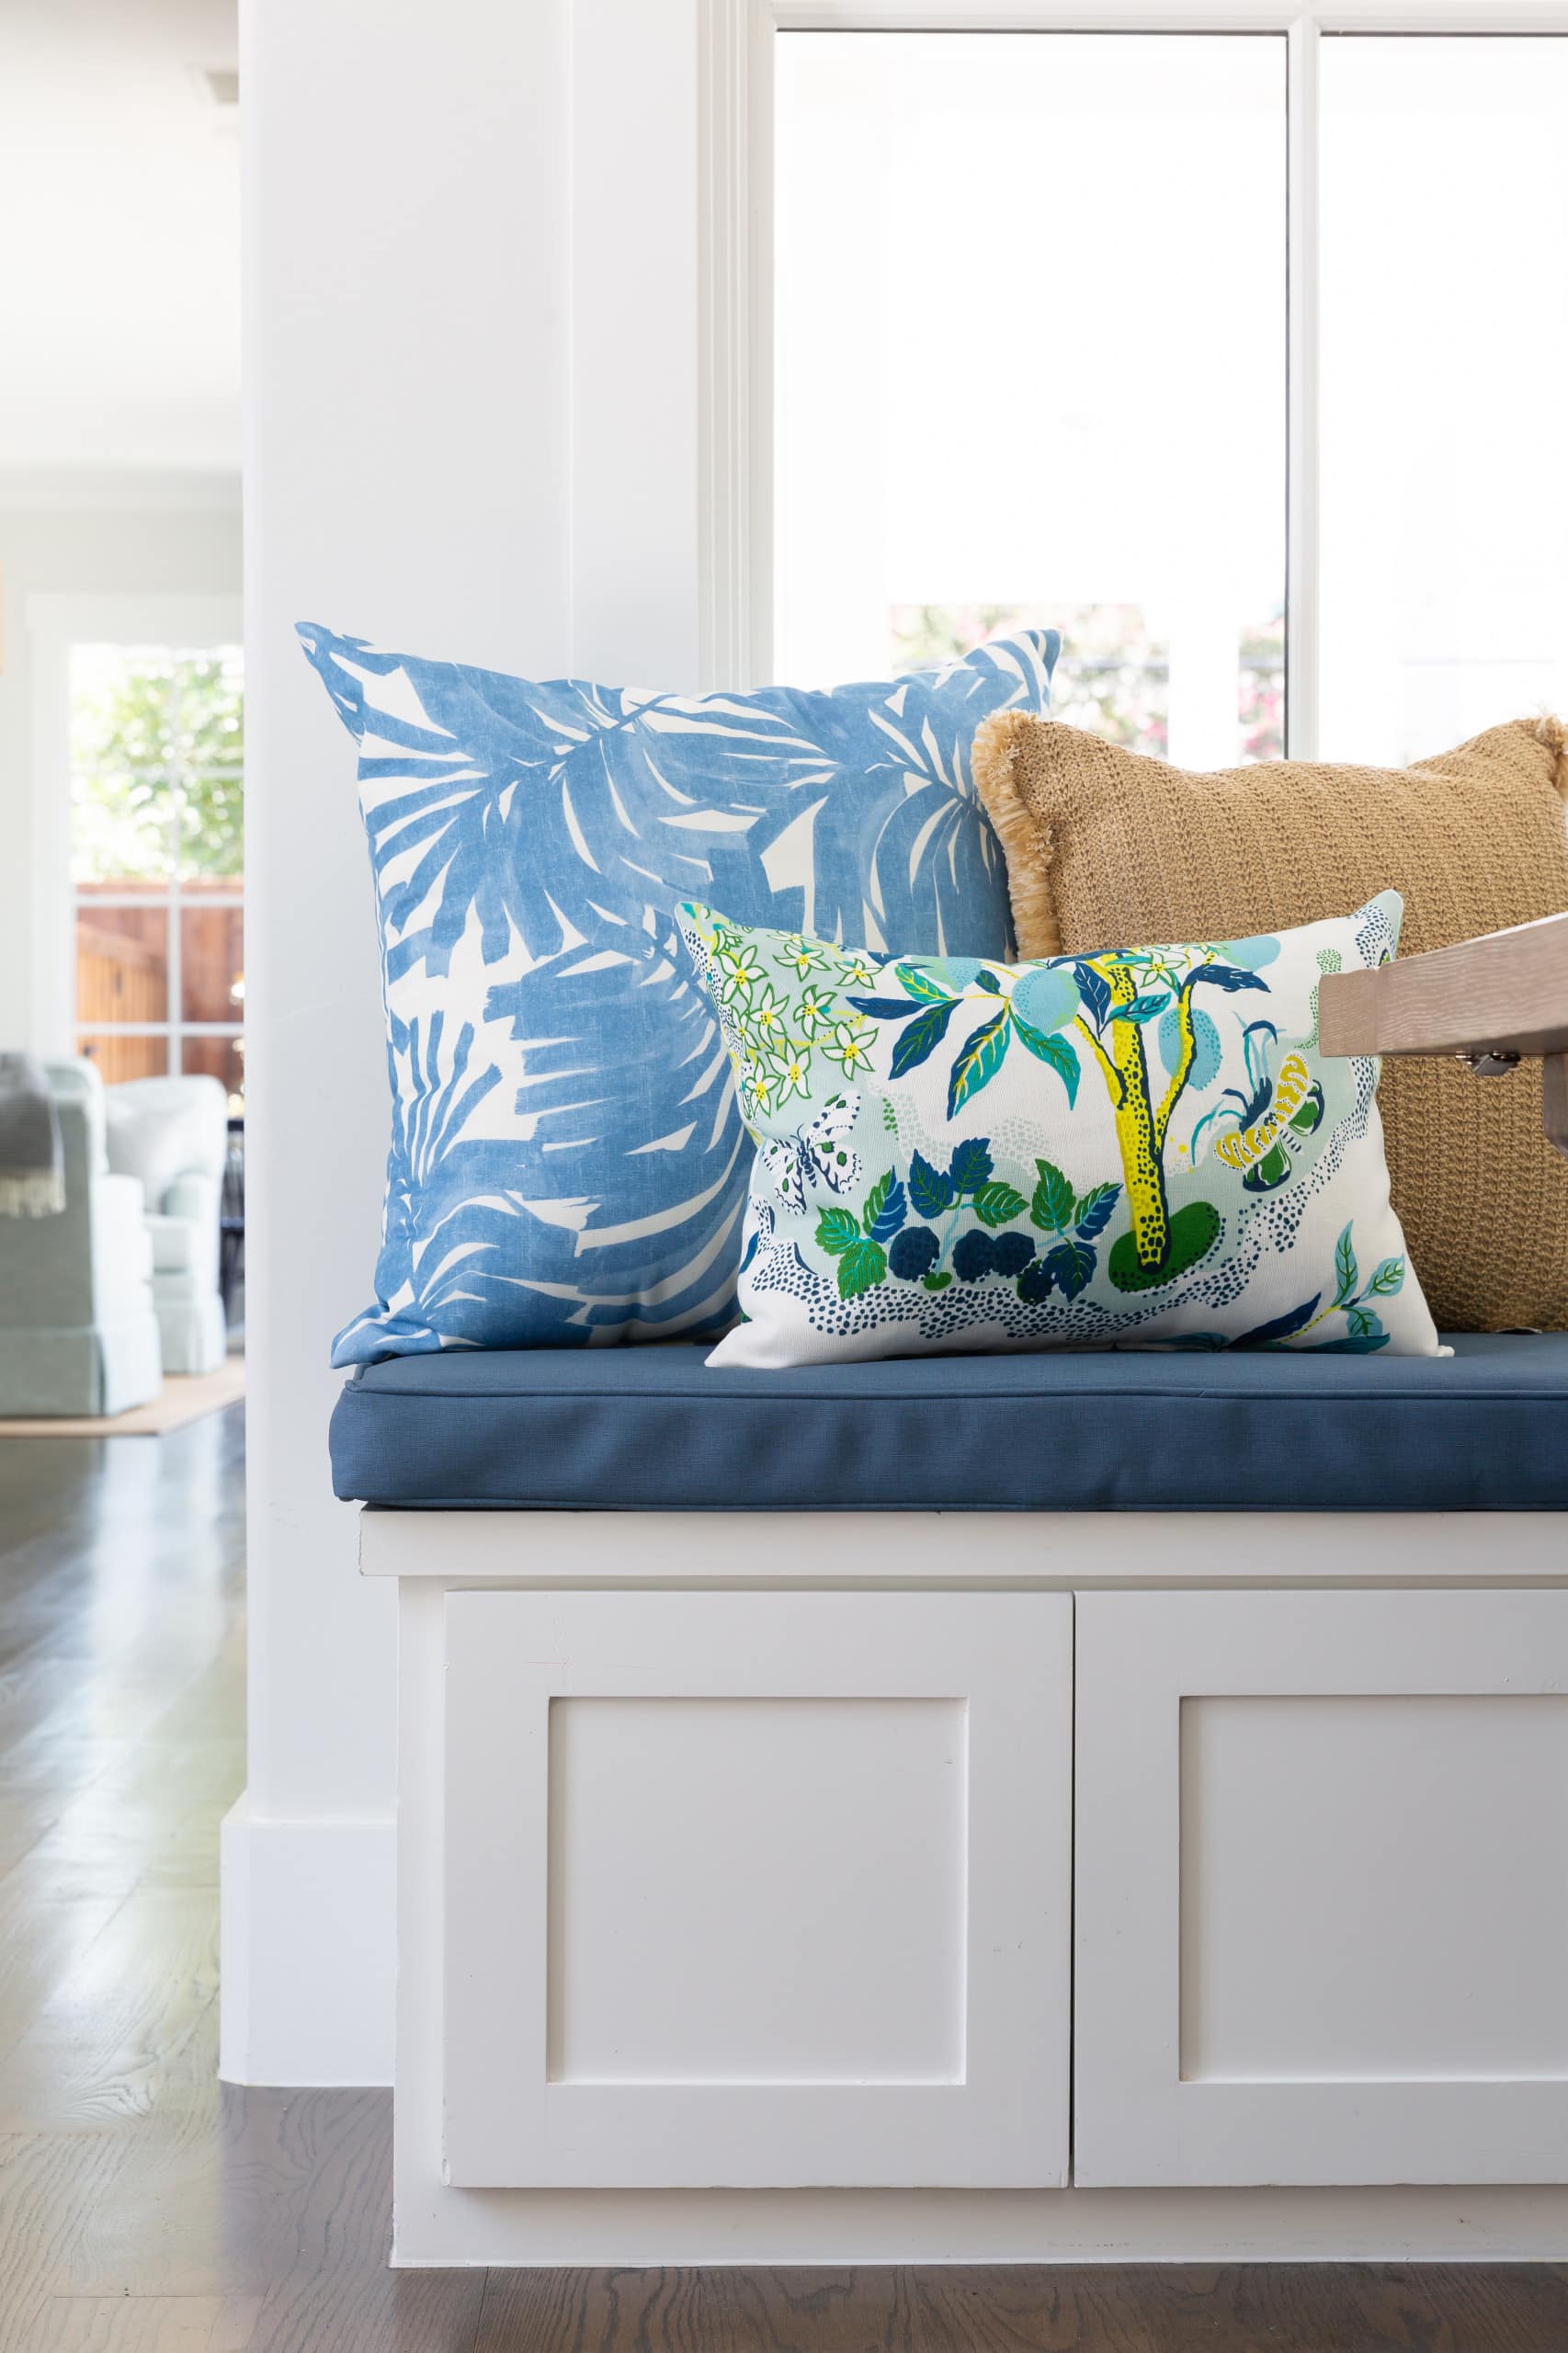 breakfast nook with a modern coastal style featuring throw pillow s